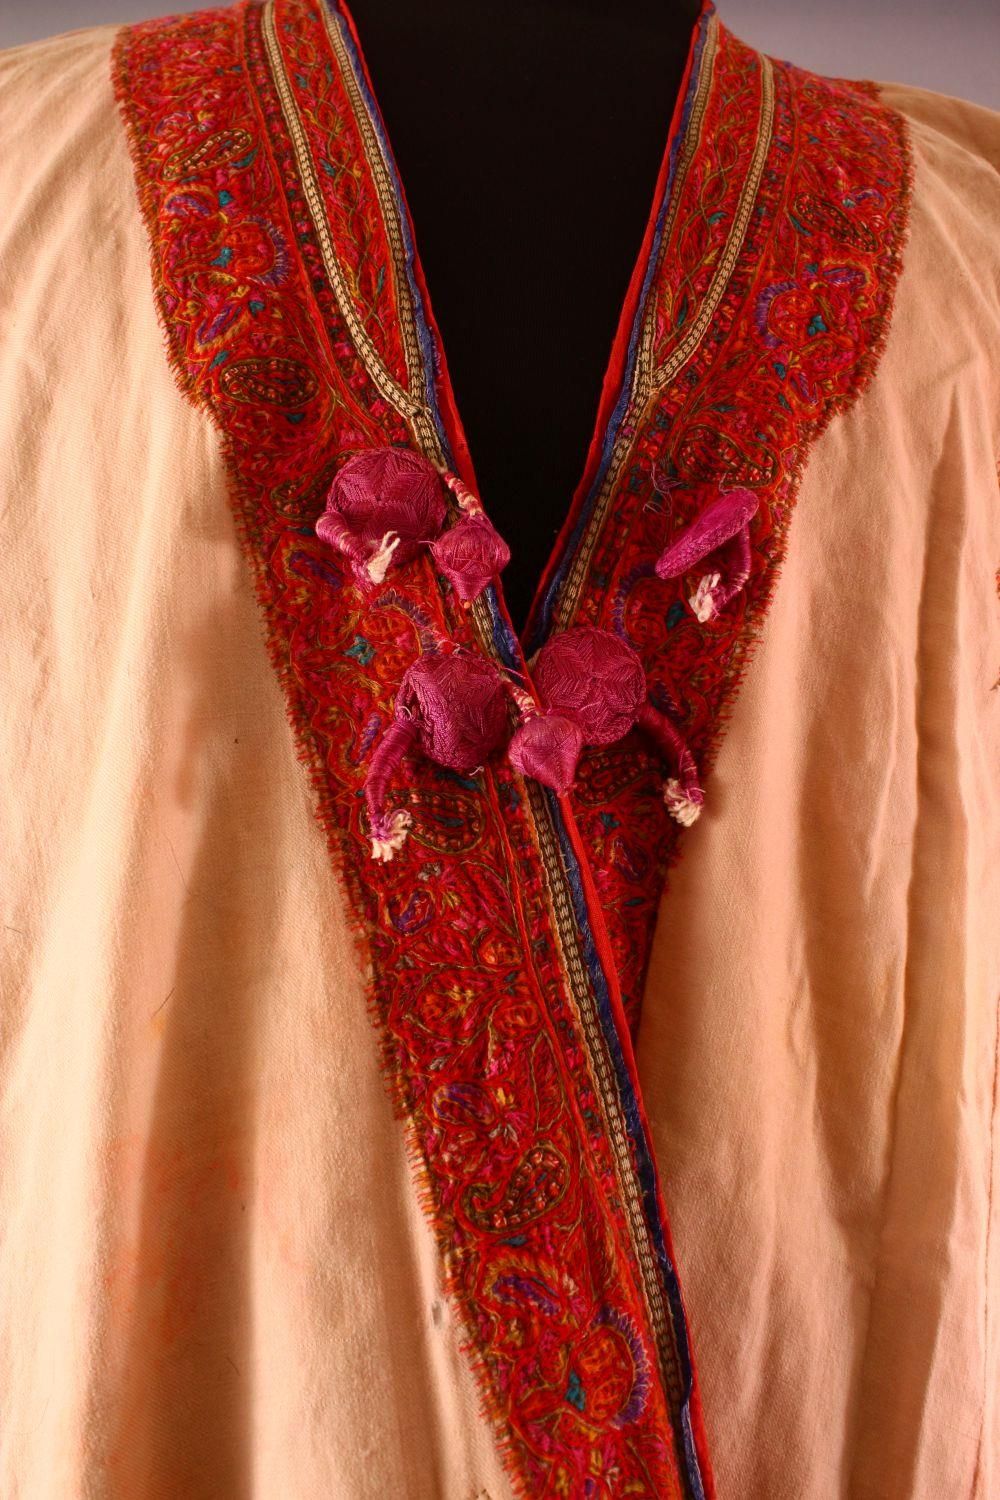 A FINE INDIAN KASHMIRI EMBROIDERED ROBE. - Image 2 of 7